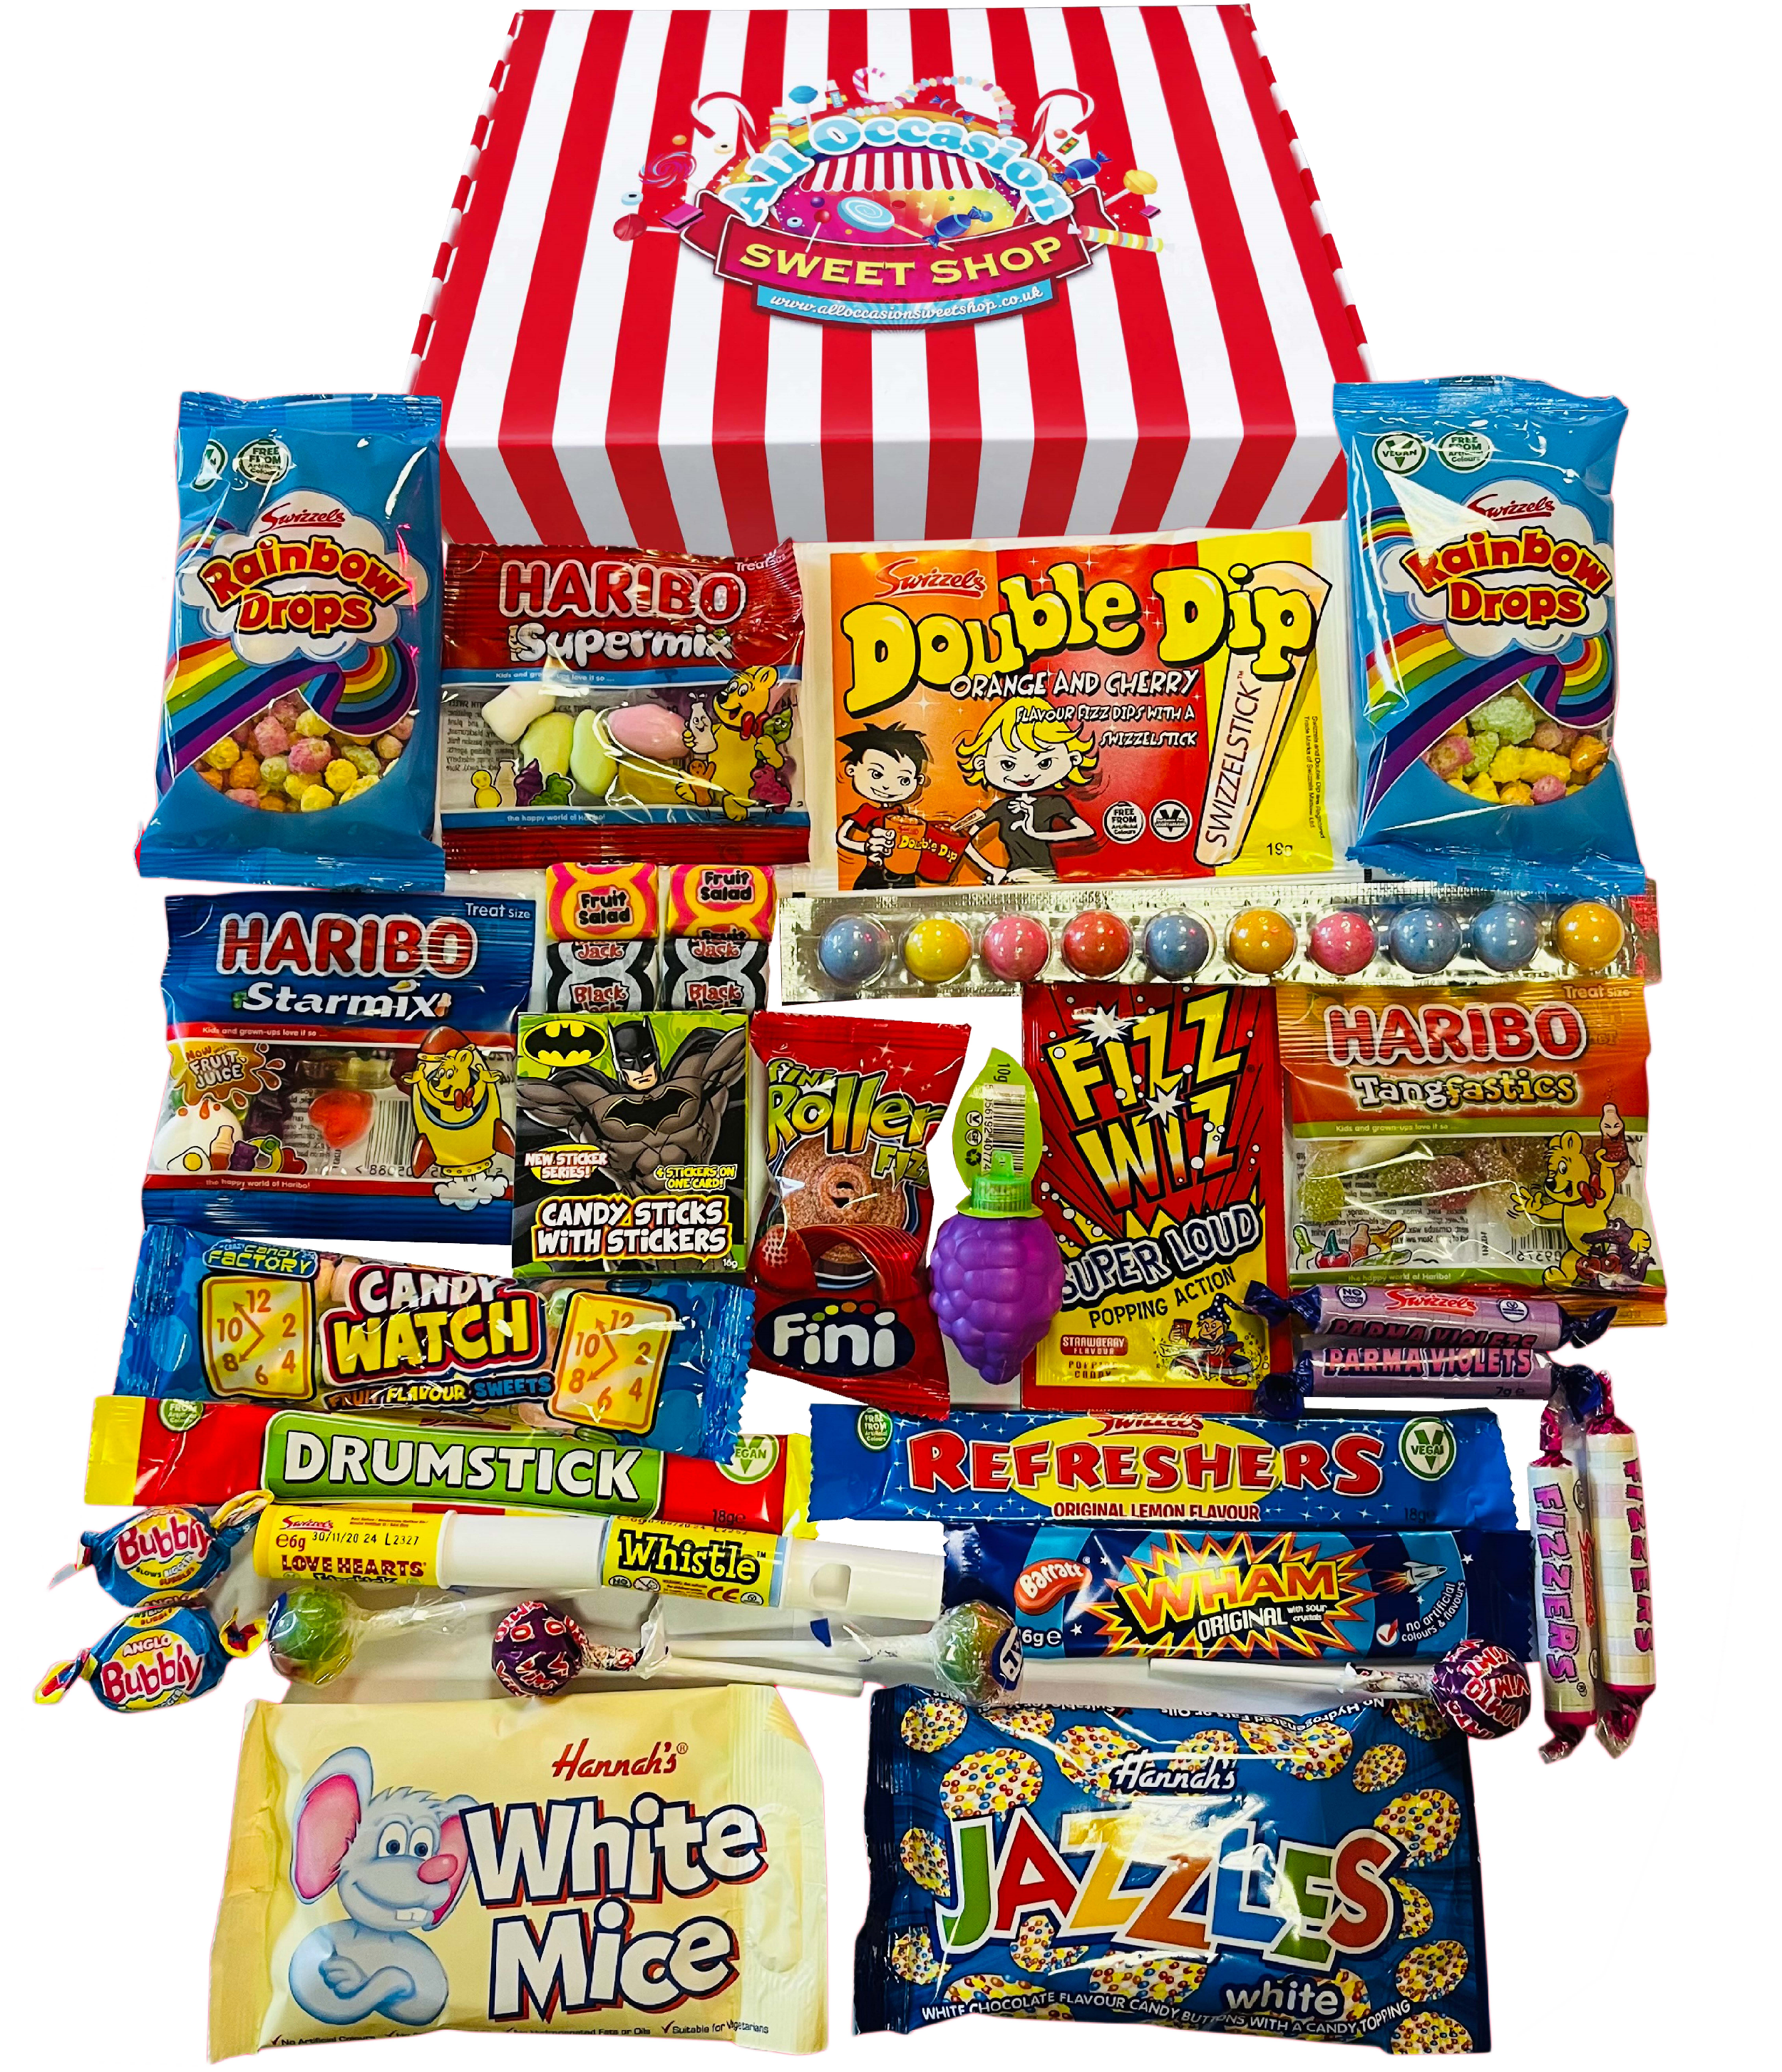 Retro　Shop　Box　Jam　–　Favourites　With　Sweet　Sweets　Packed　Retro　Occasion　Gift　All　Hamper　Sweets